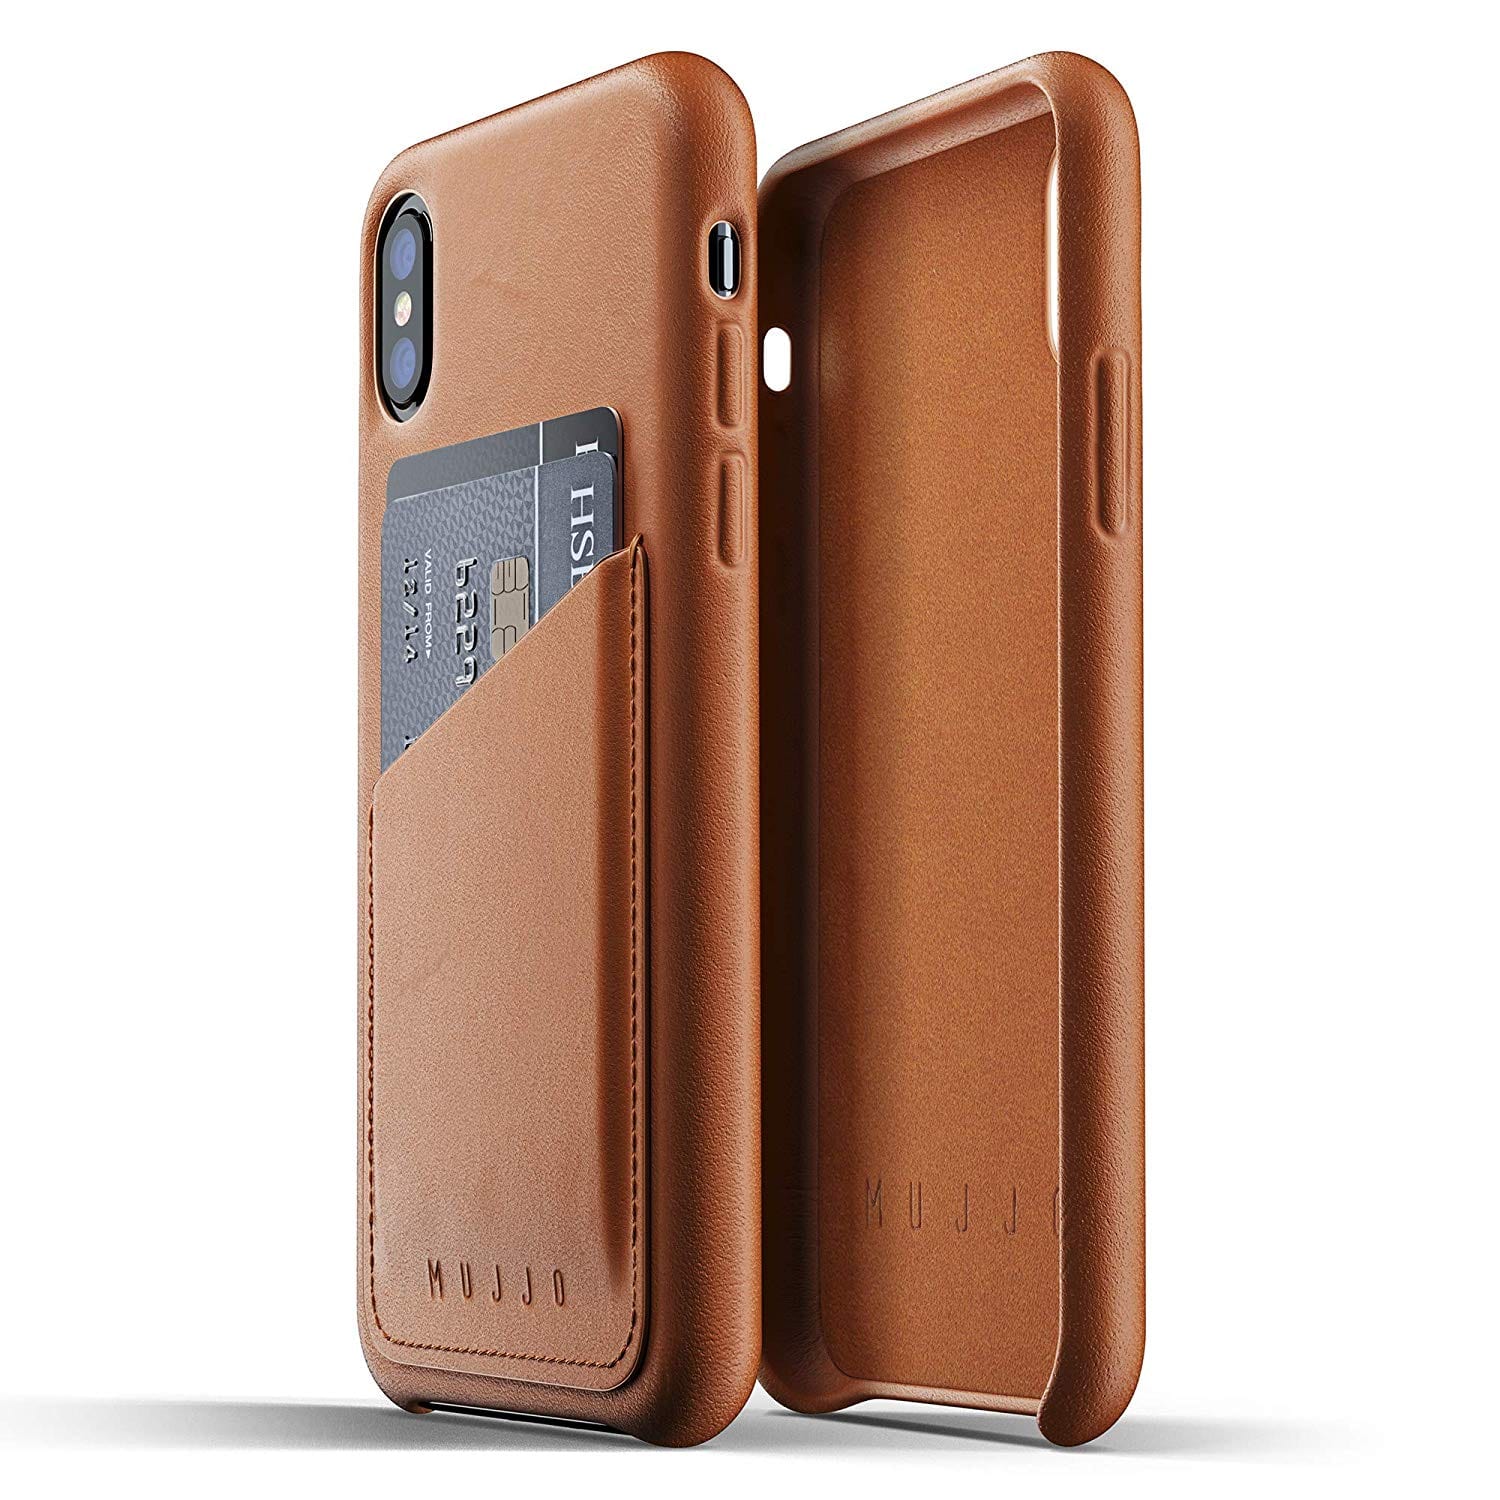 Mujjo Full Leather Wallet case for Apple iPhone Xs, iPhone X - Tan